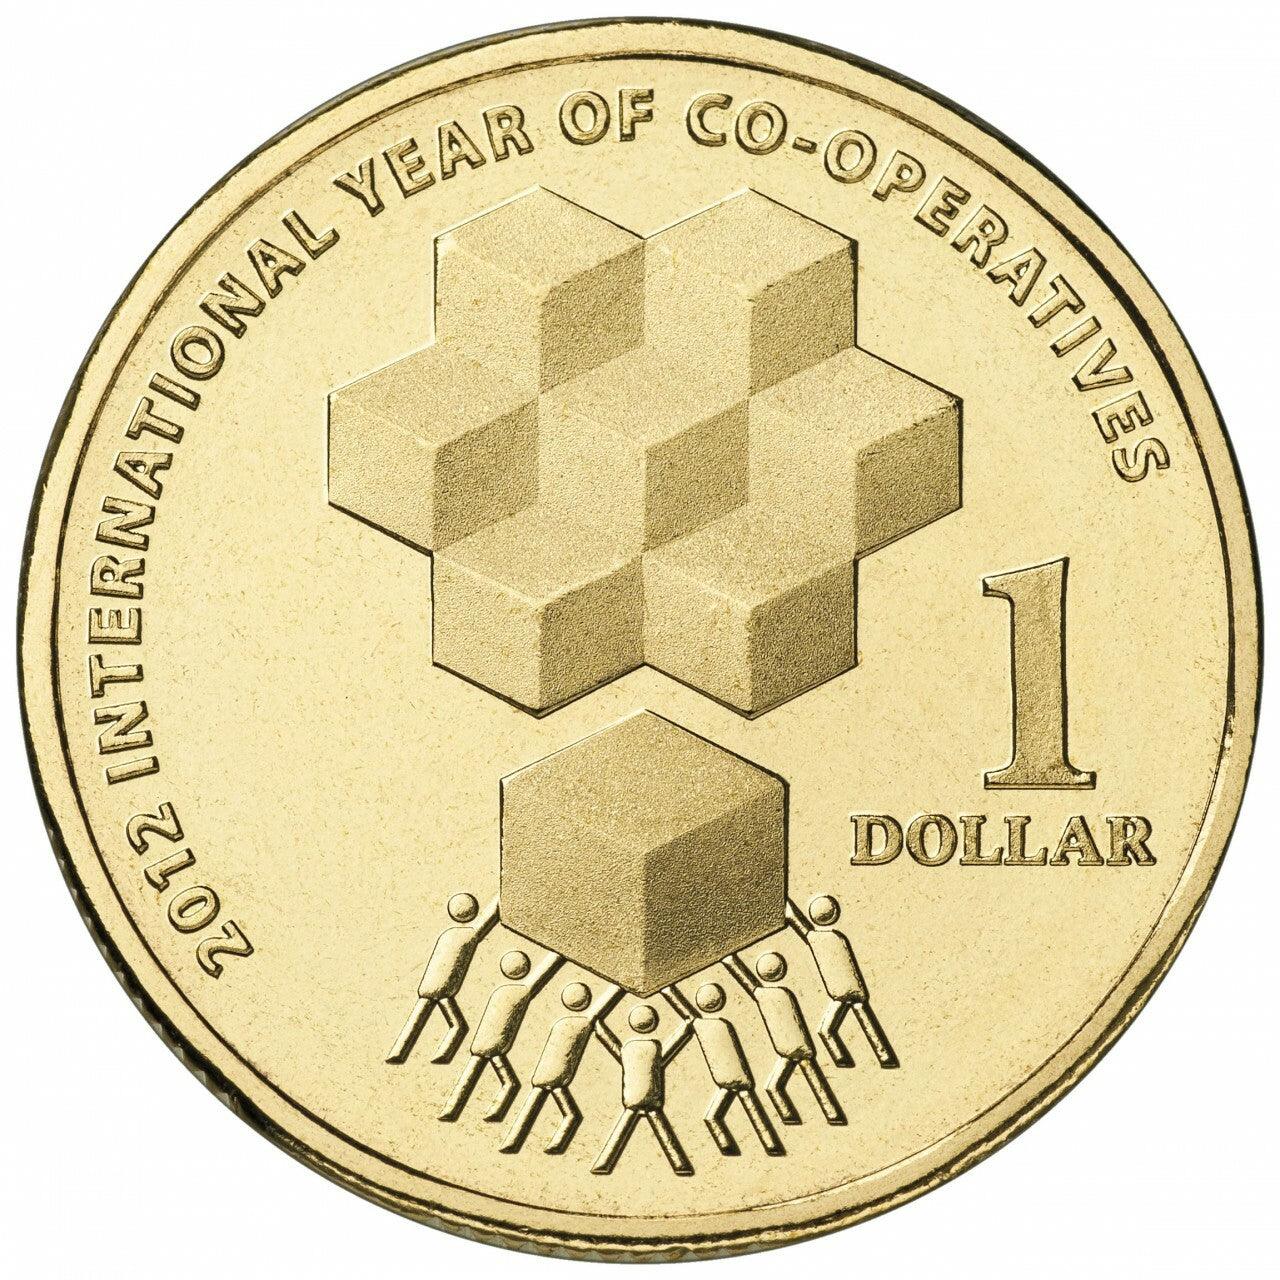 2012 PNC - Year of the Co-operatives - Loose Change Coins